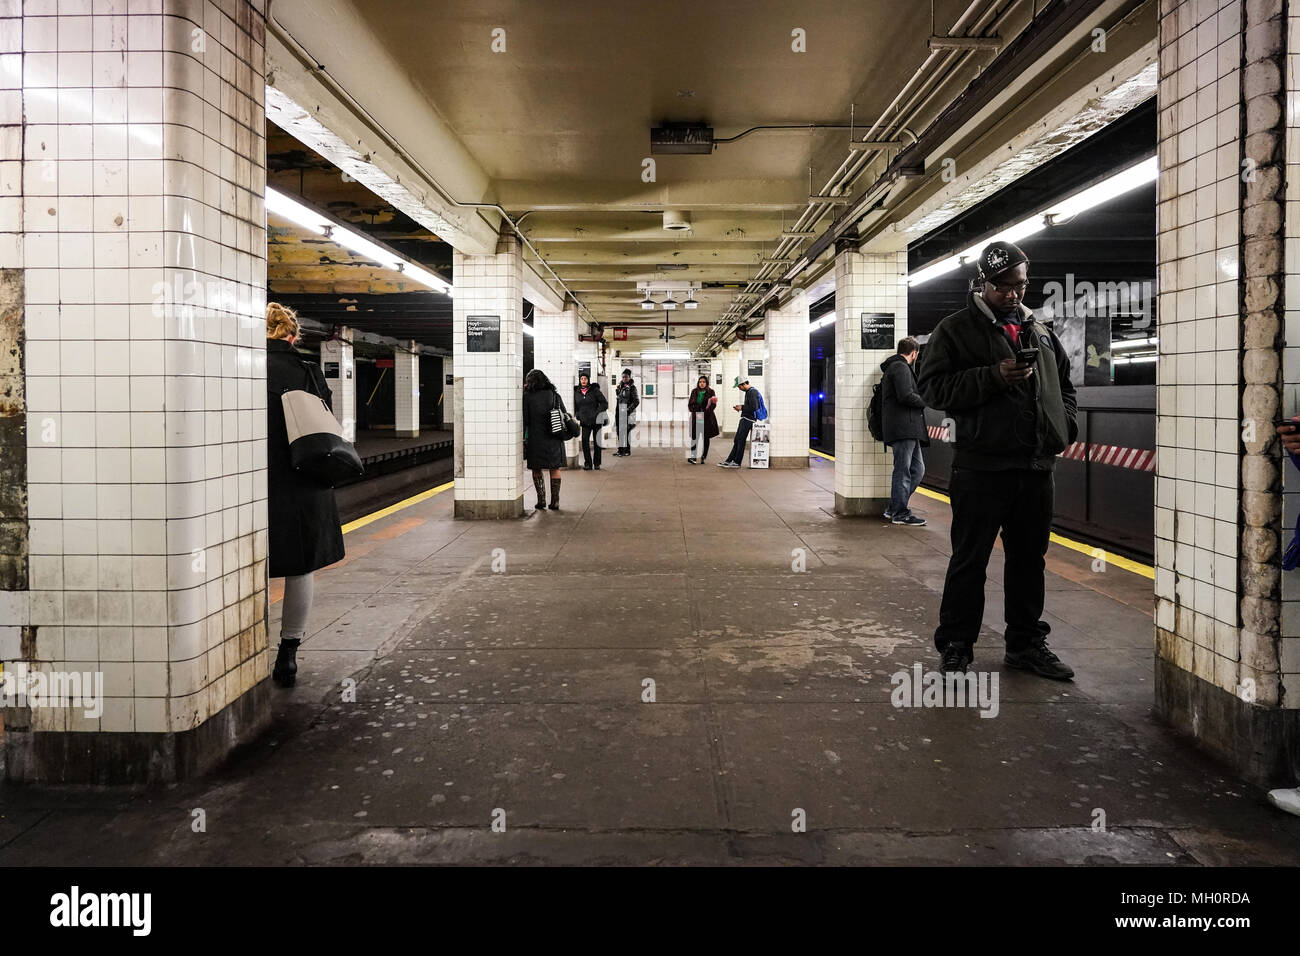 A general view of the New York City subway in the United States. From a series of travel photos in the United States. Photo date: Friday, April 6, 201 Stock Photo